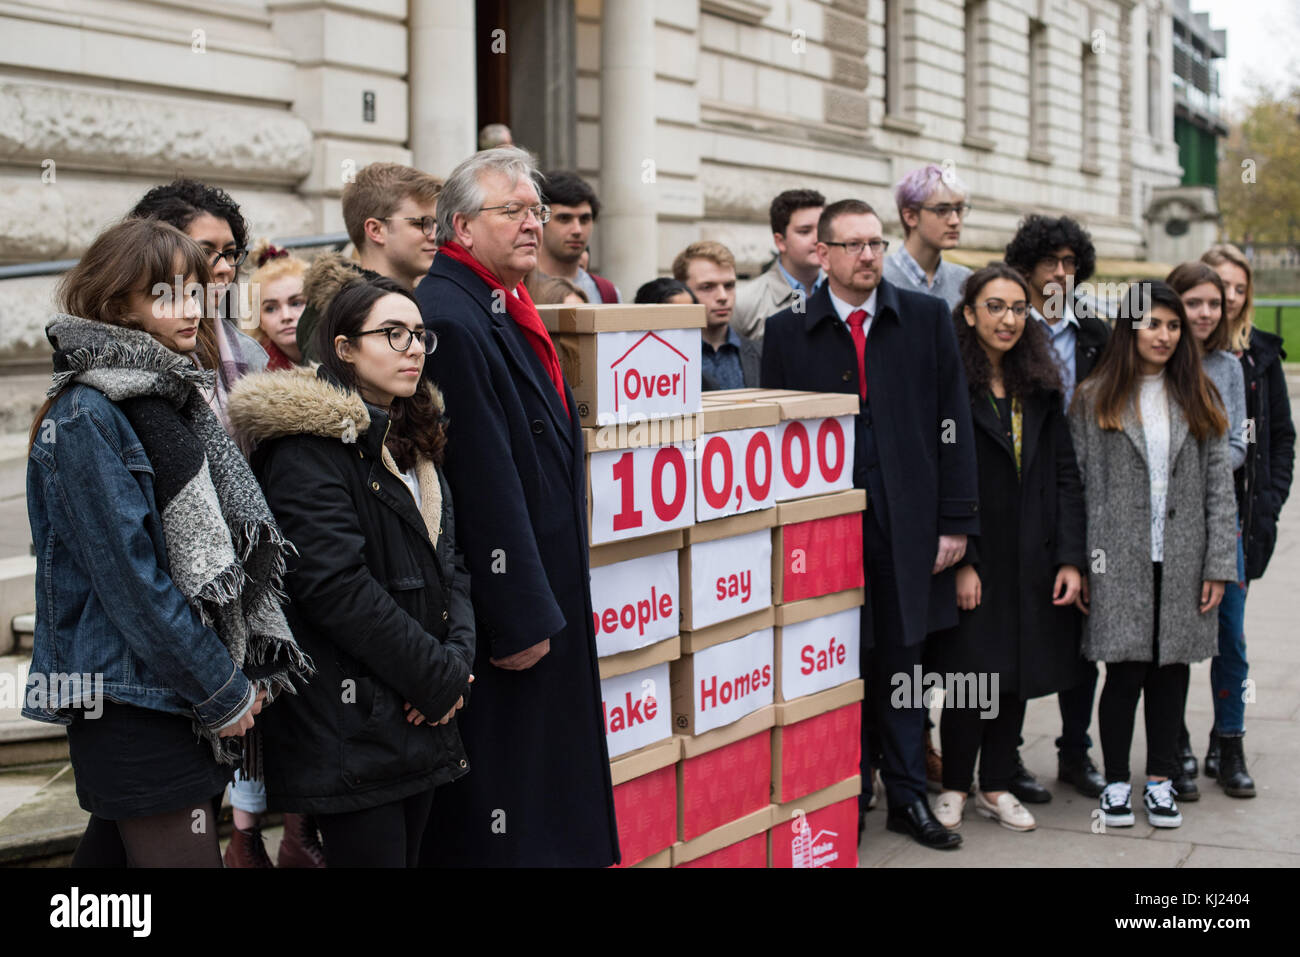 London, United Kingdom. 21st November 2017.Peter Dowd MP, Labour's Shadow Chief Secretary to the Treasury and Andrew Gwynne MP, Labour’s Shadow Secretary of State for Communities and Local Government deliver Labour’s ‘Make Homes Safe’ Petition to the Treasury. Credit: Peter Manning/Alamy Live News Stock Photo